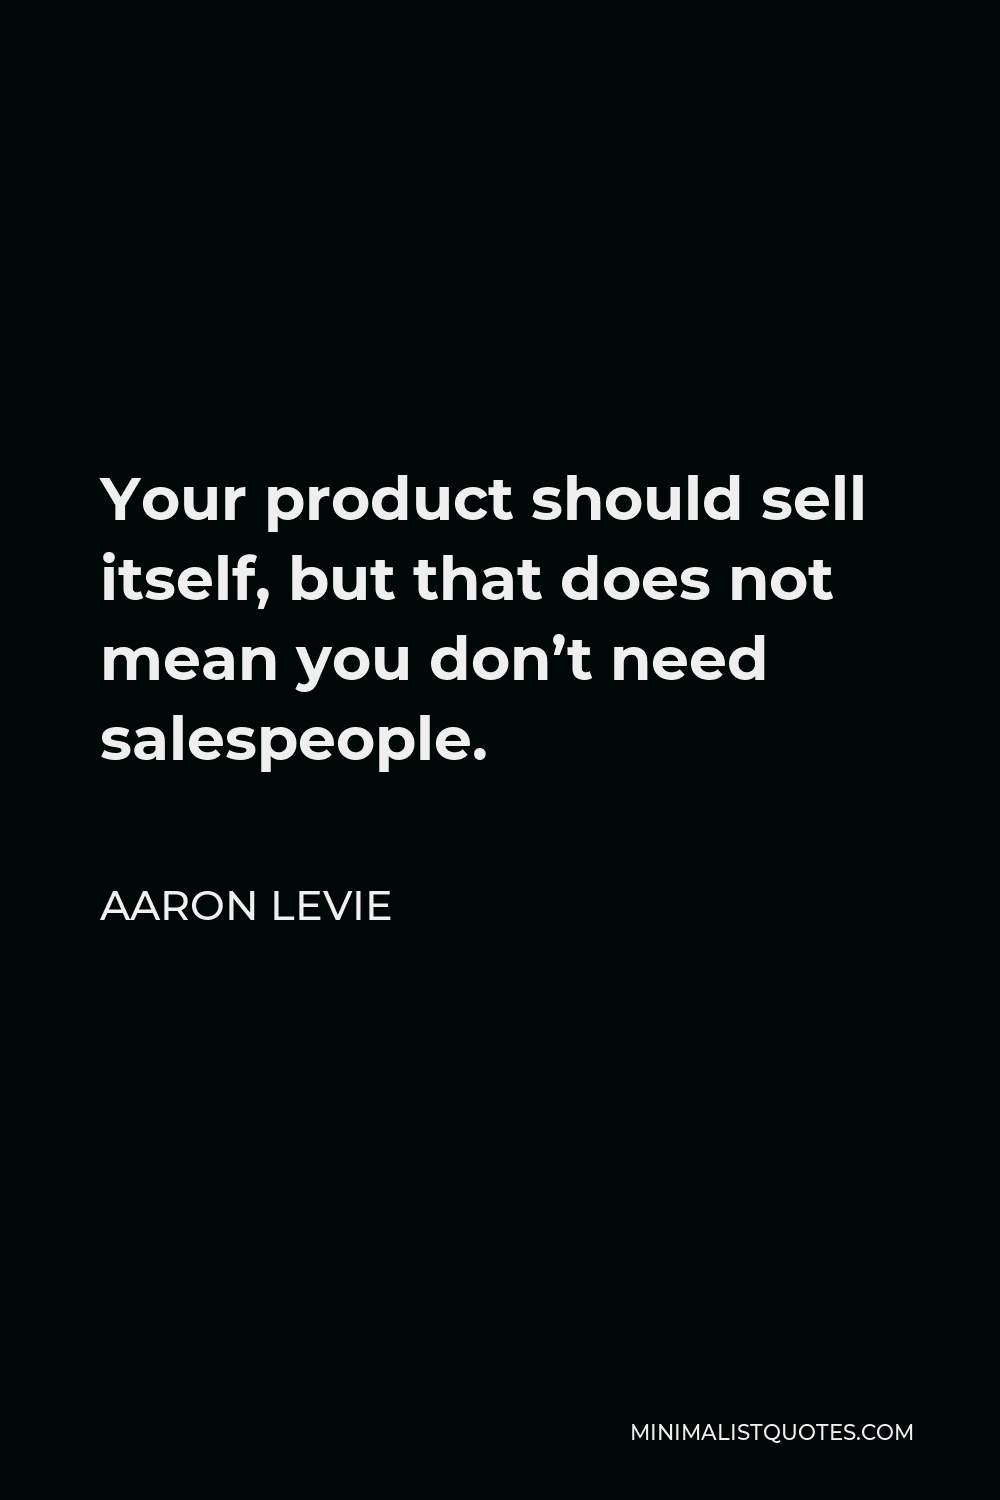 Aaron Levie Quote - Your product should sell itself, but that does not mean you don’t need salespeople.